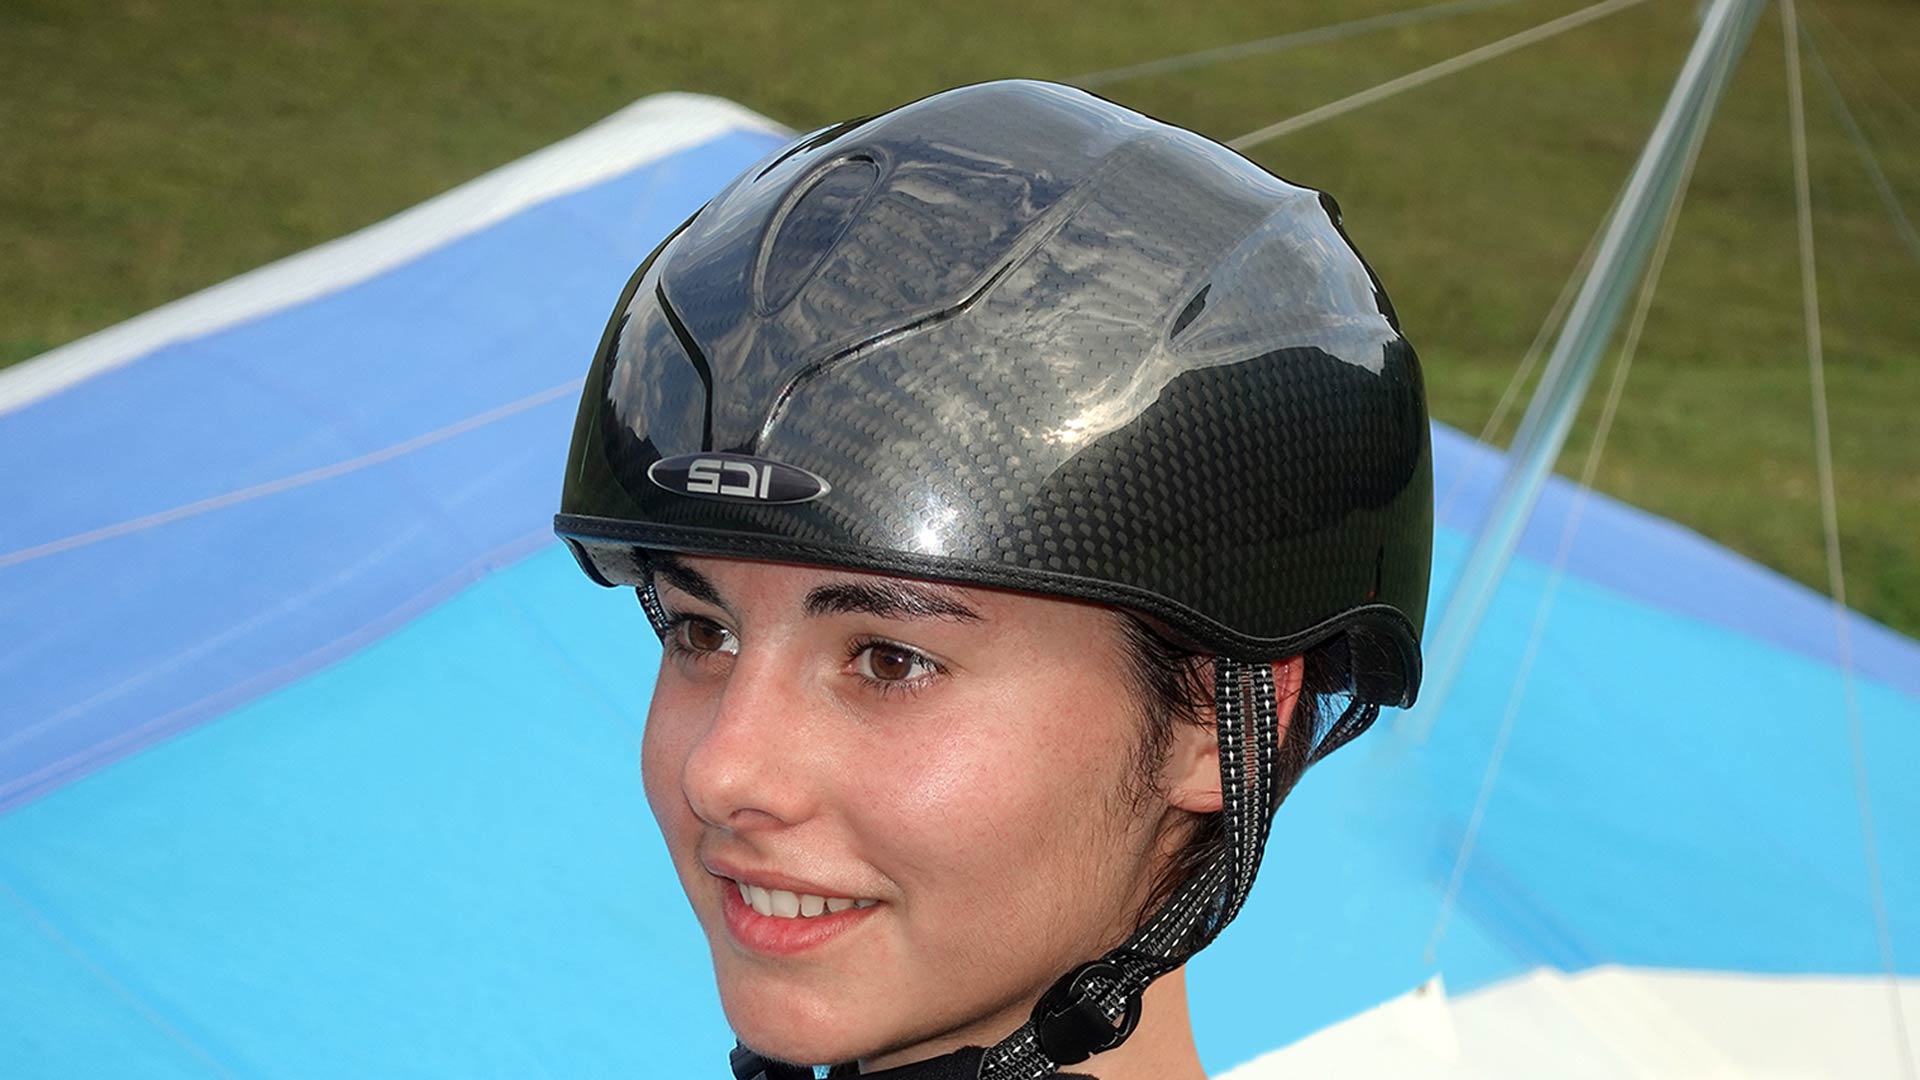 Hang Glider and helmets